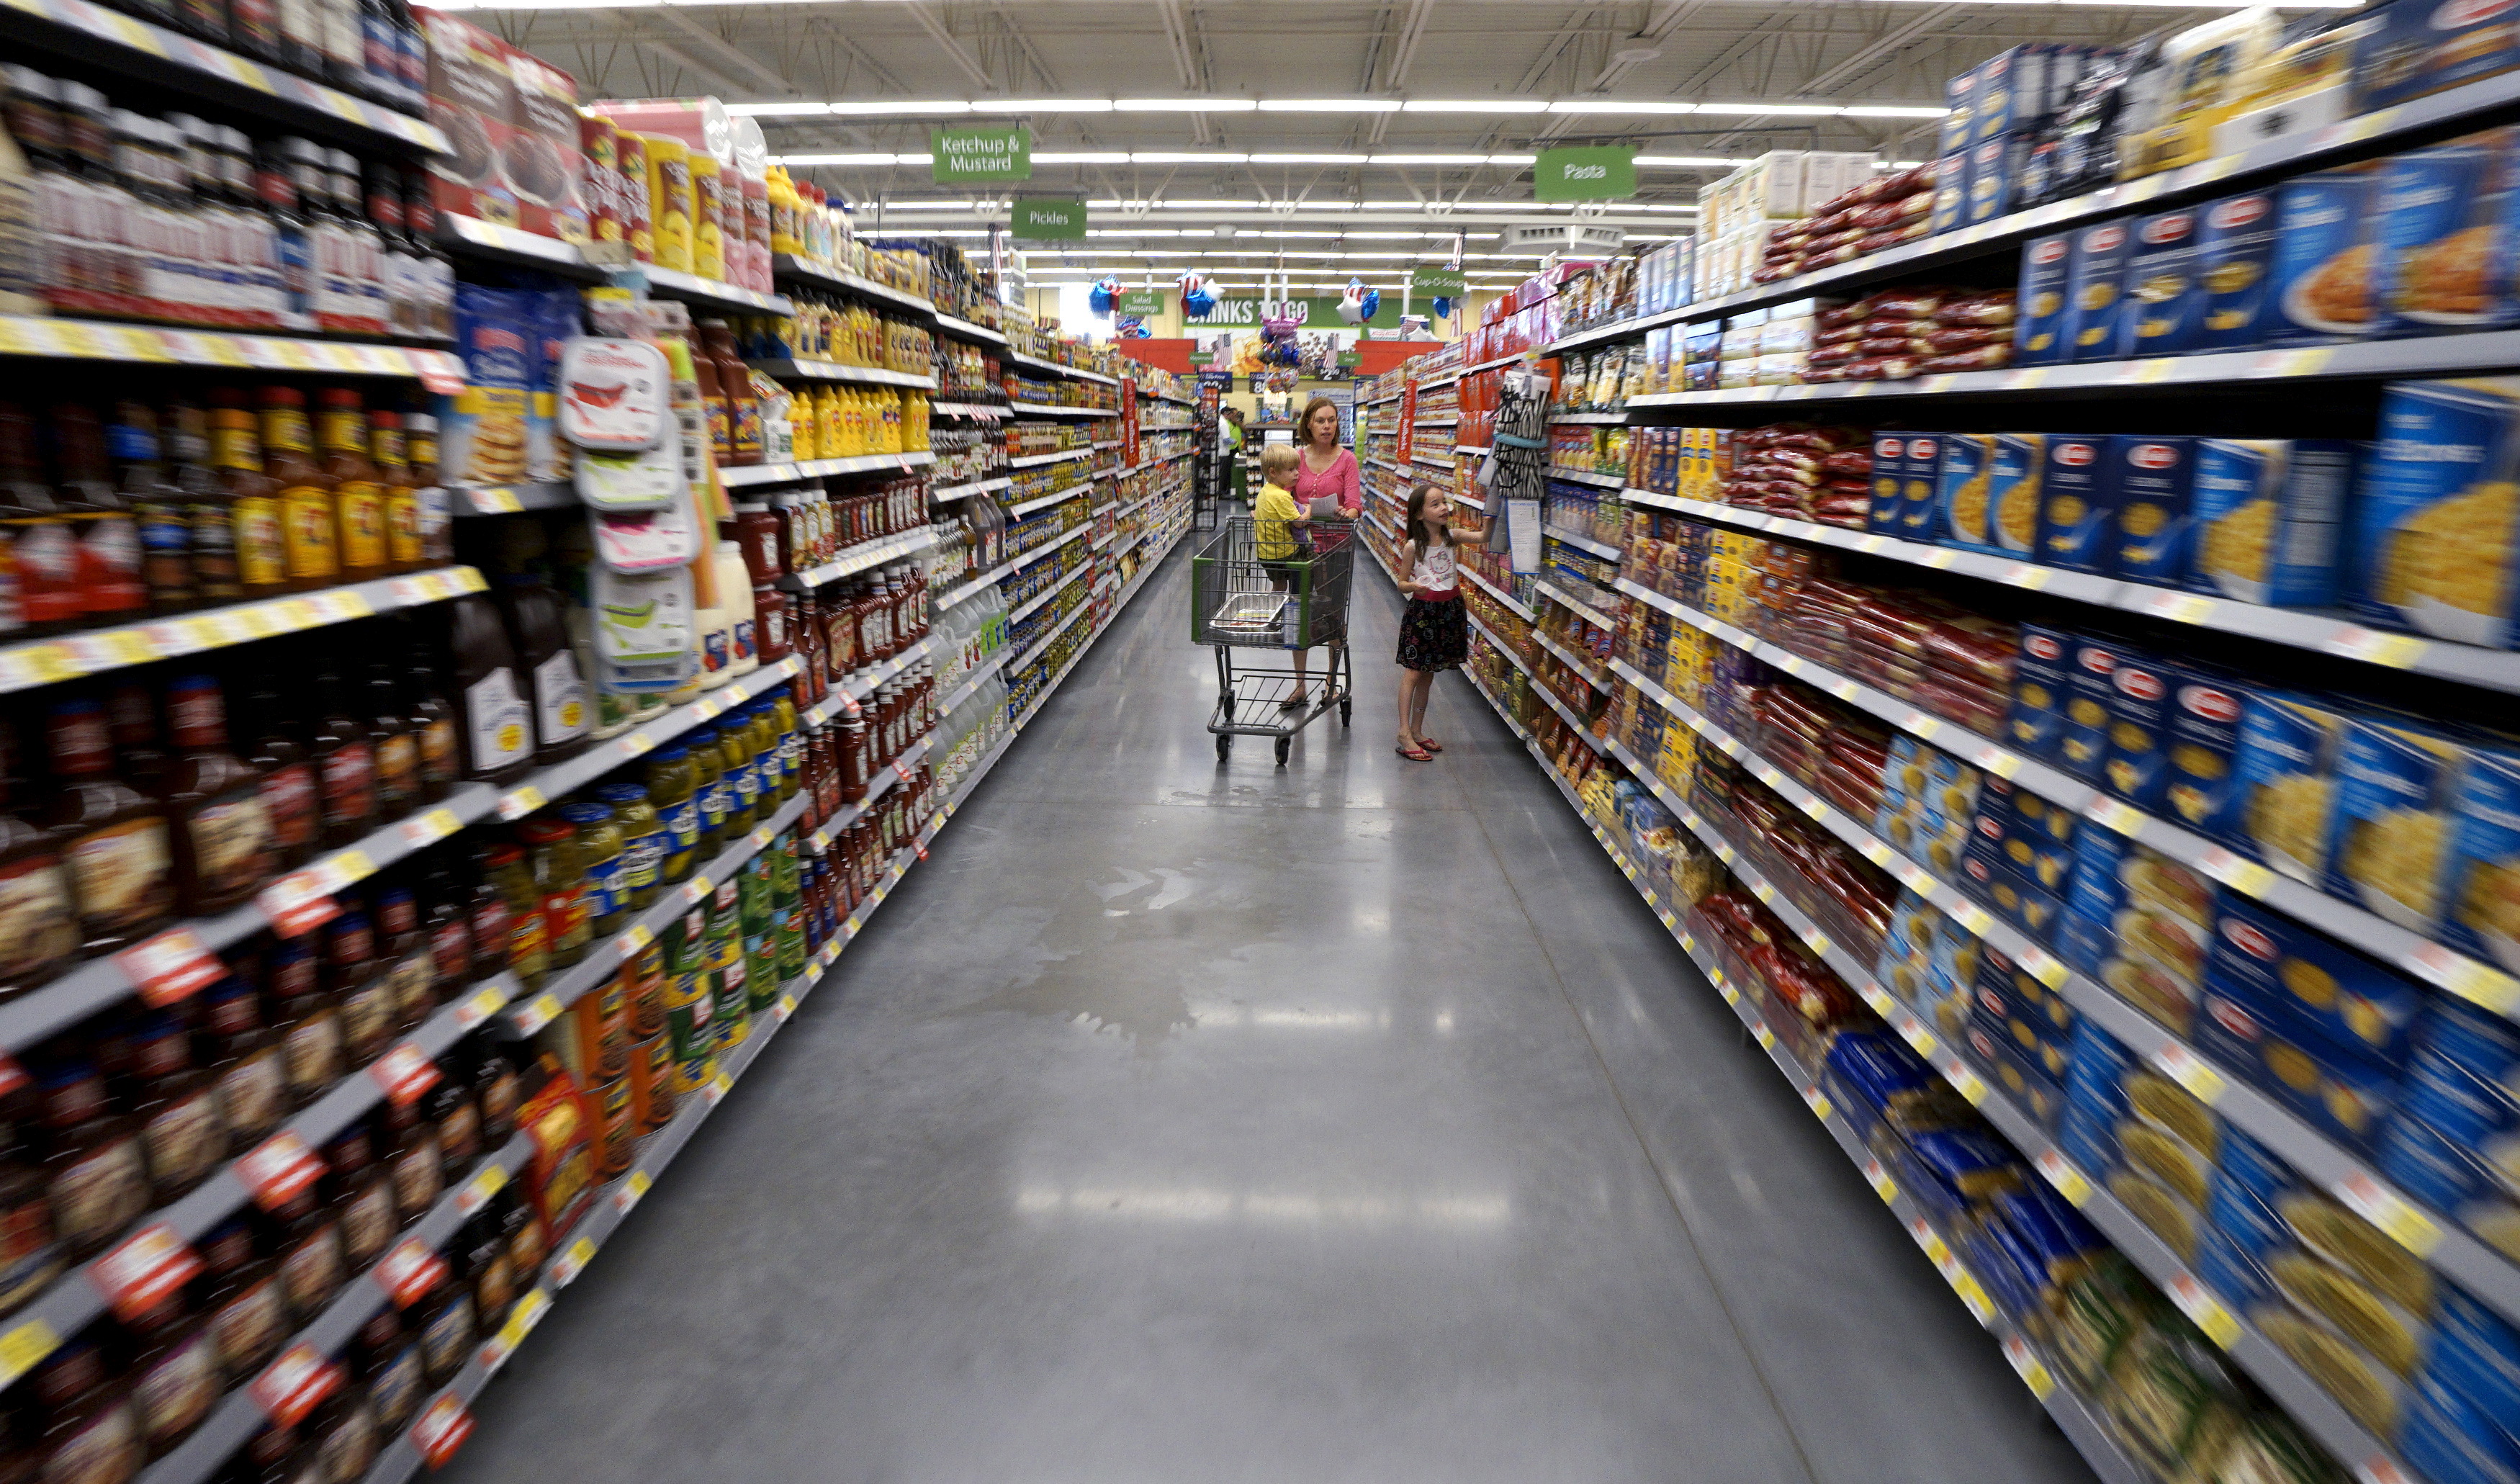 A family shops at the Wal-Mart Neighborhood Market in Bentonville